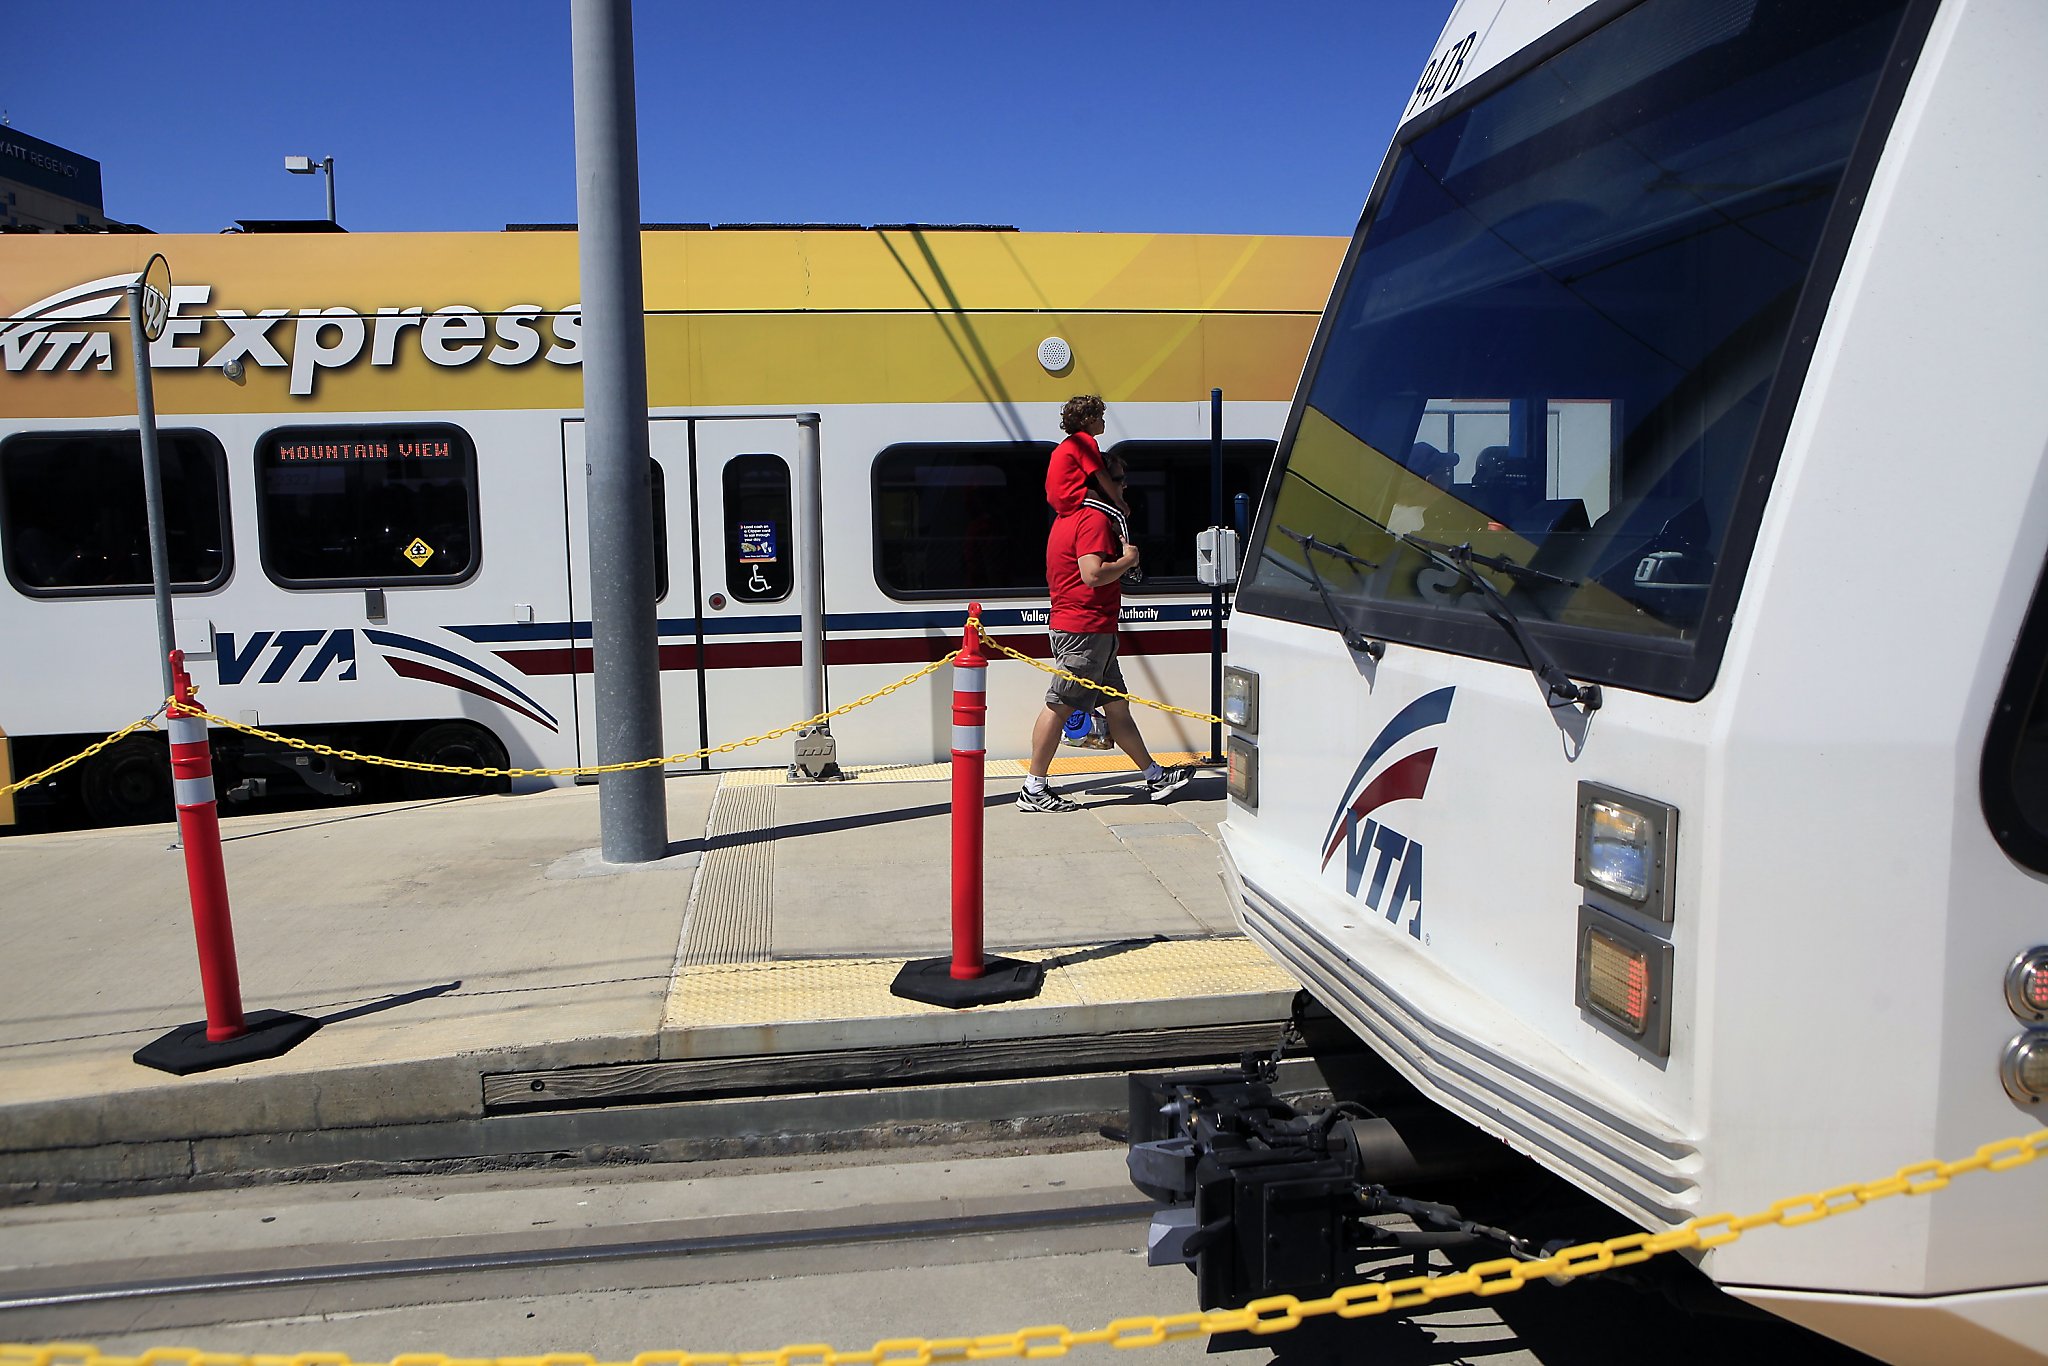 VTA expected to sell 2,500 49ers train tickets to Levi's, have only sold 11